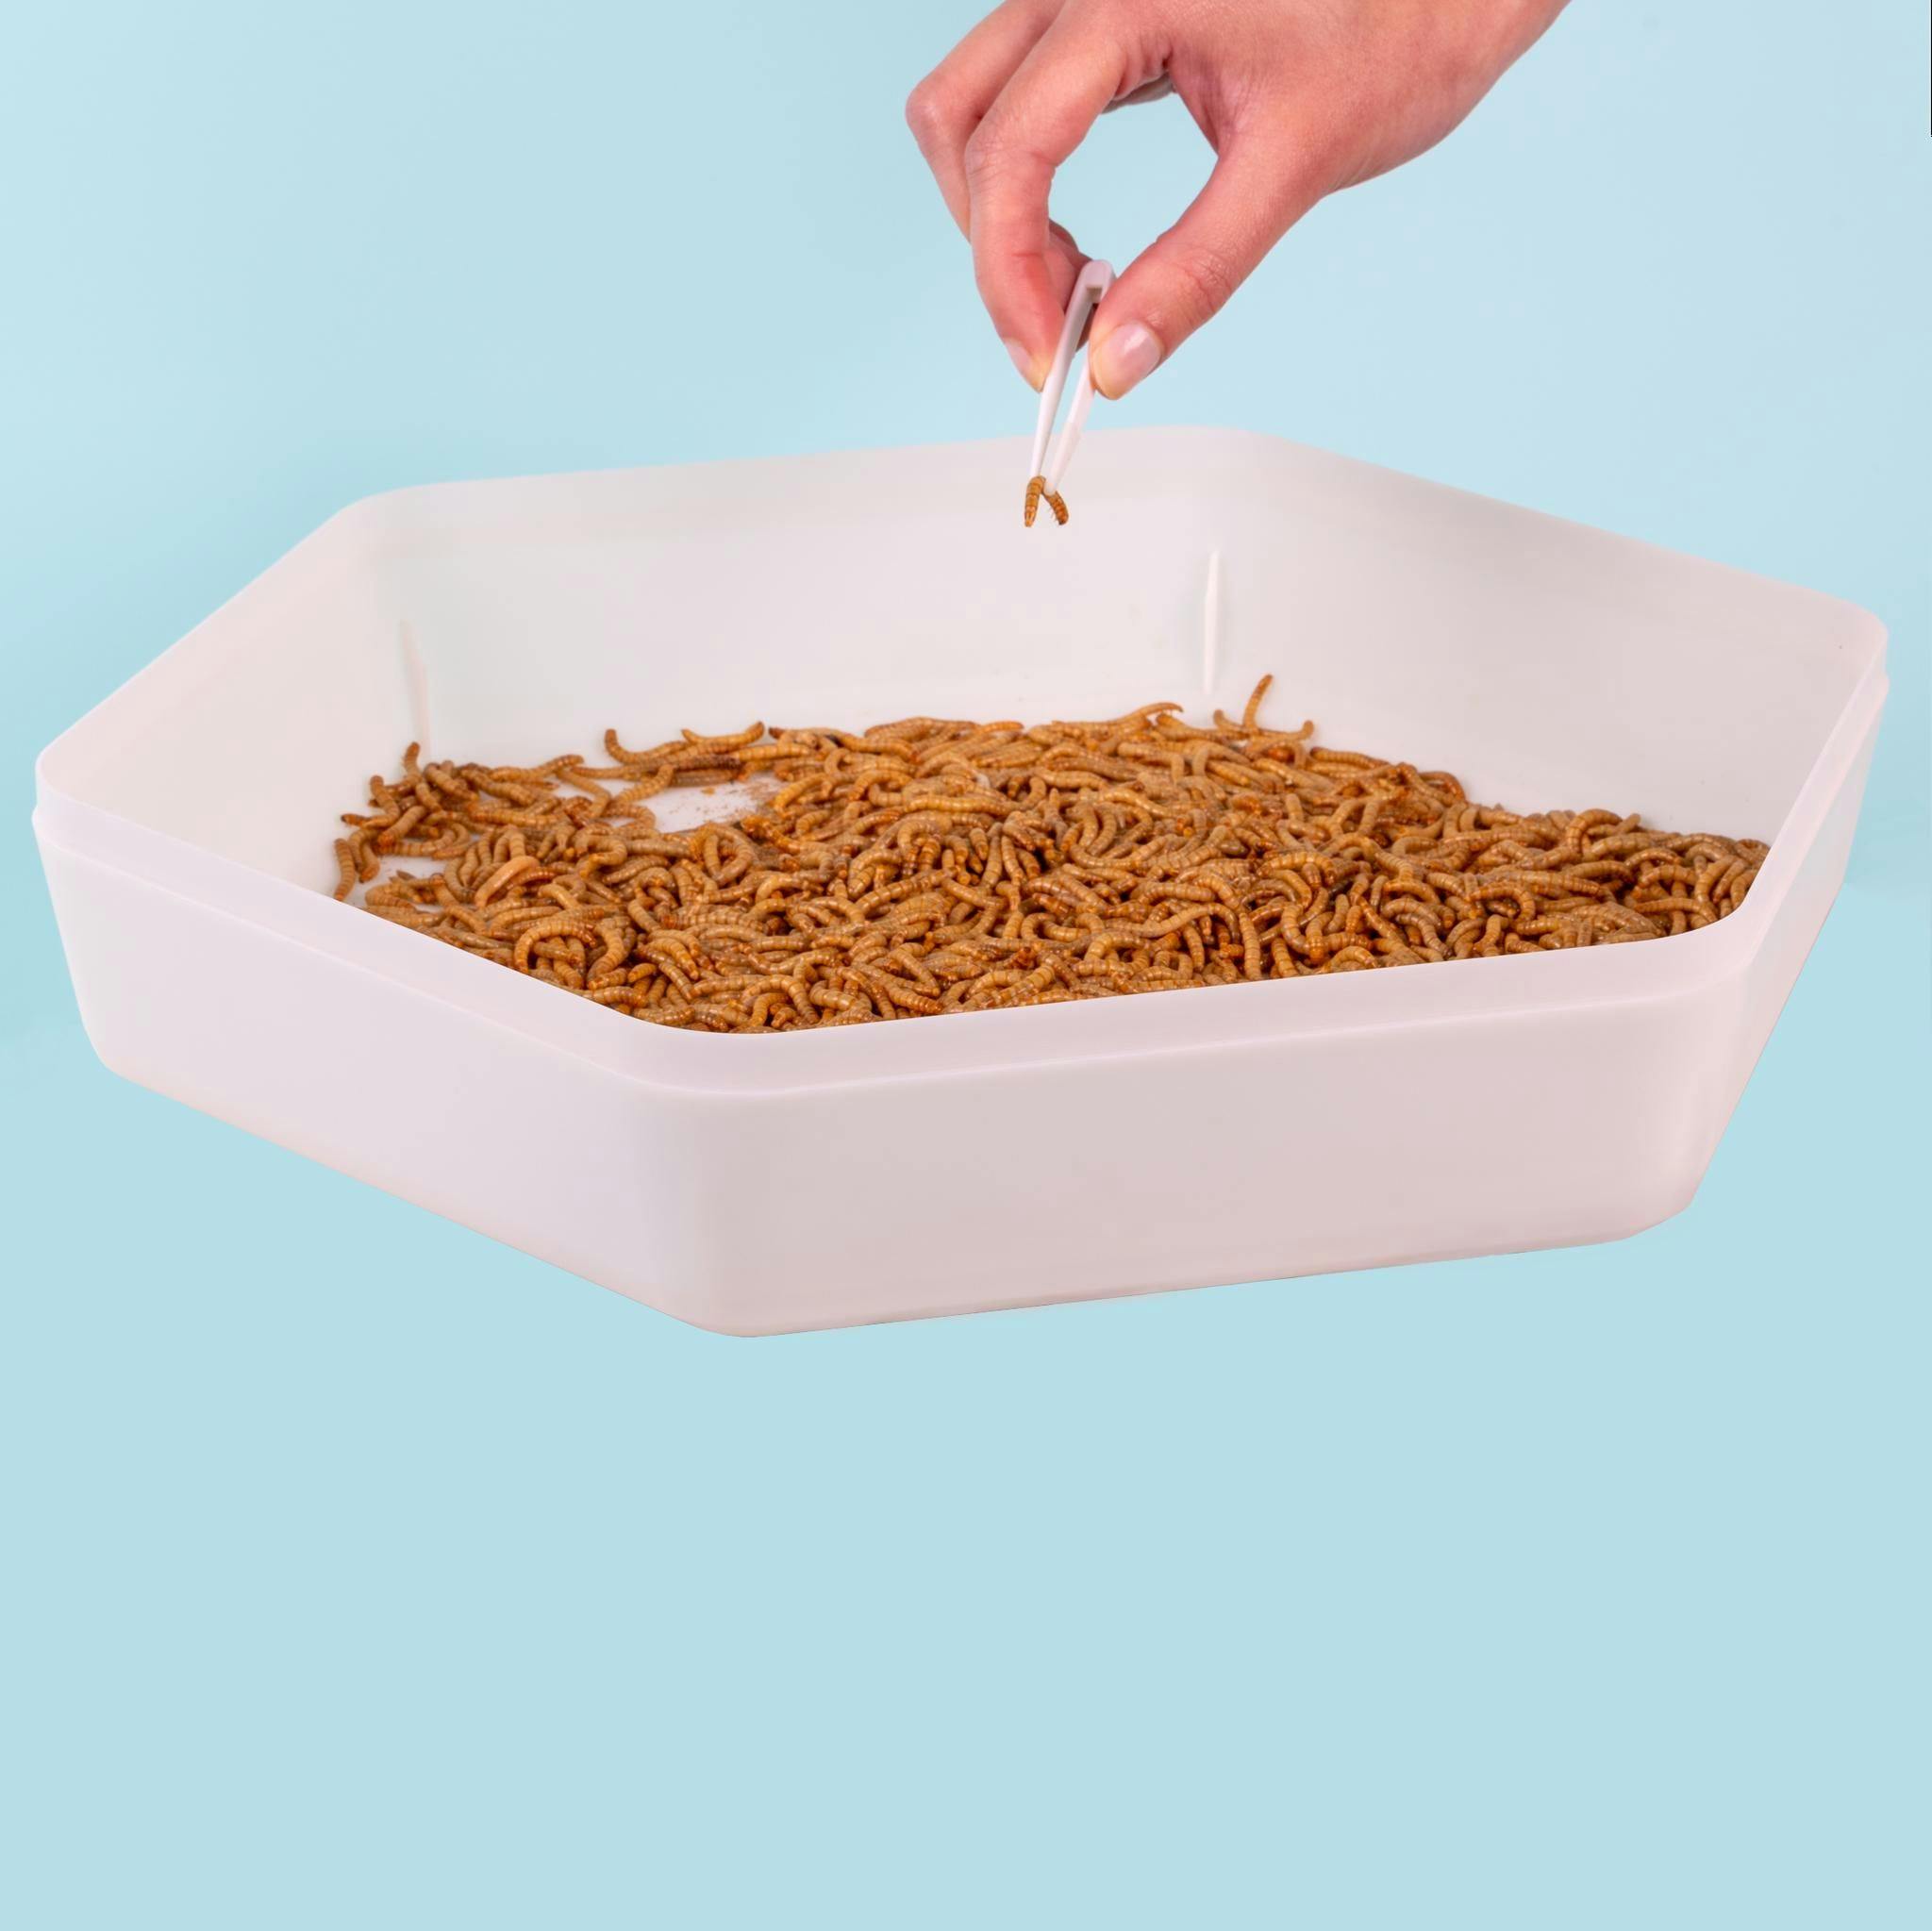 Image 1 for Mealworm Storage Tray (Beetle Tray Not Included) by The Bug Factory